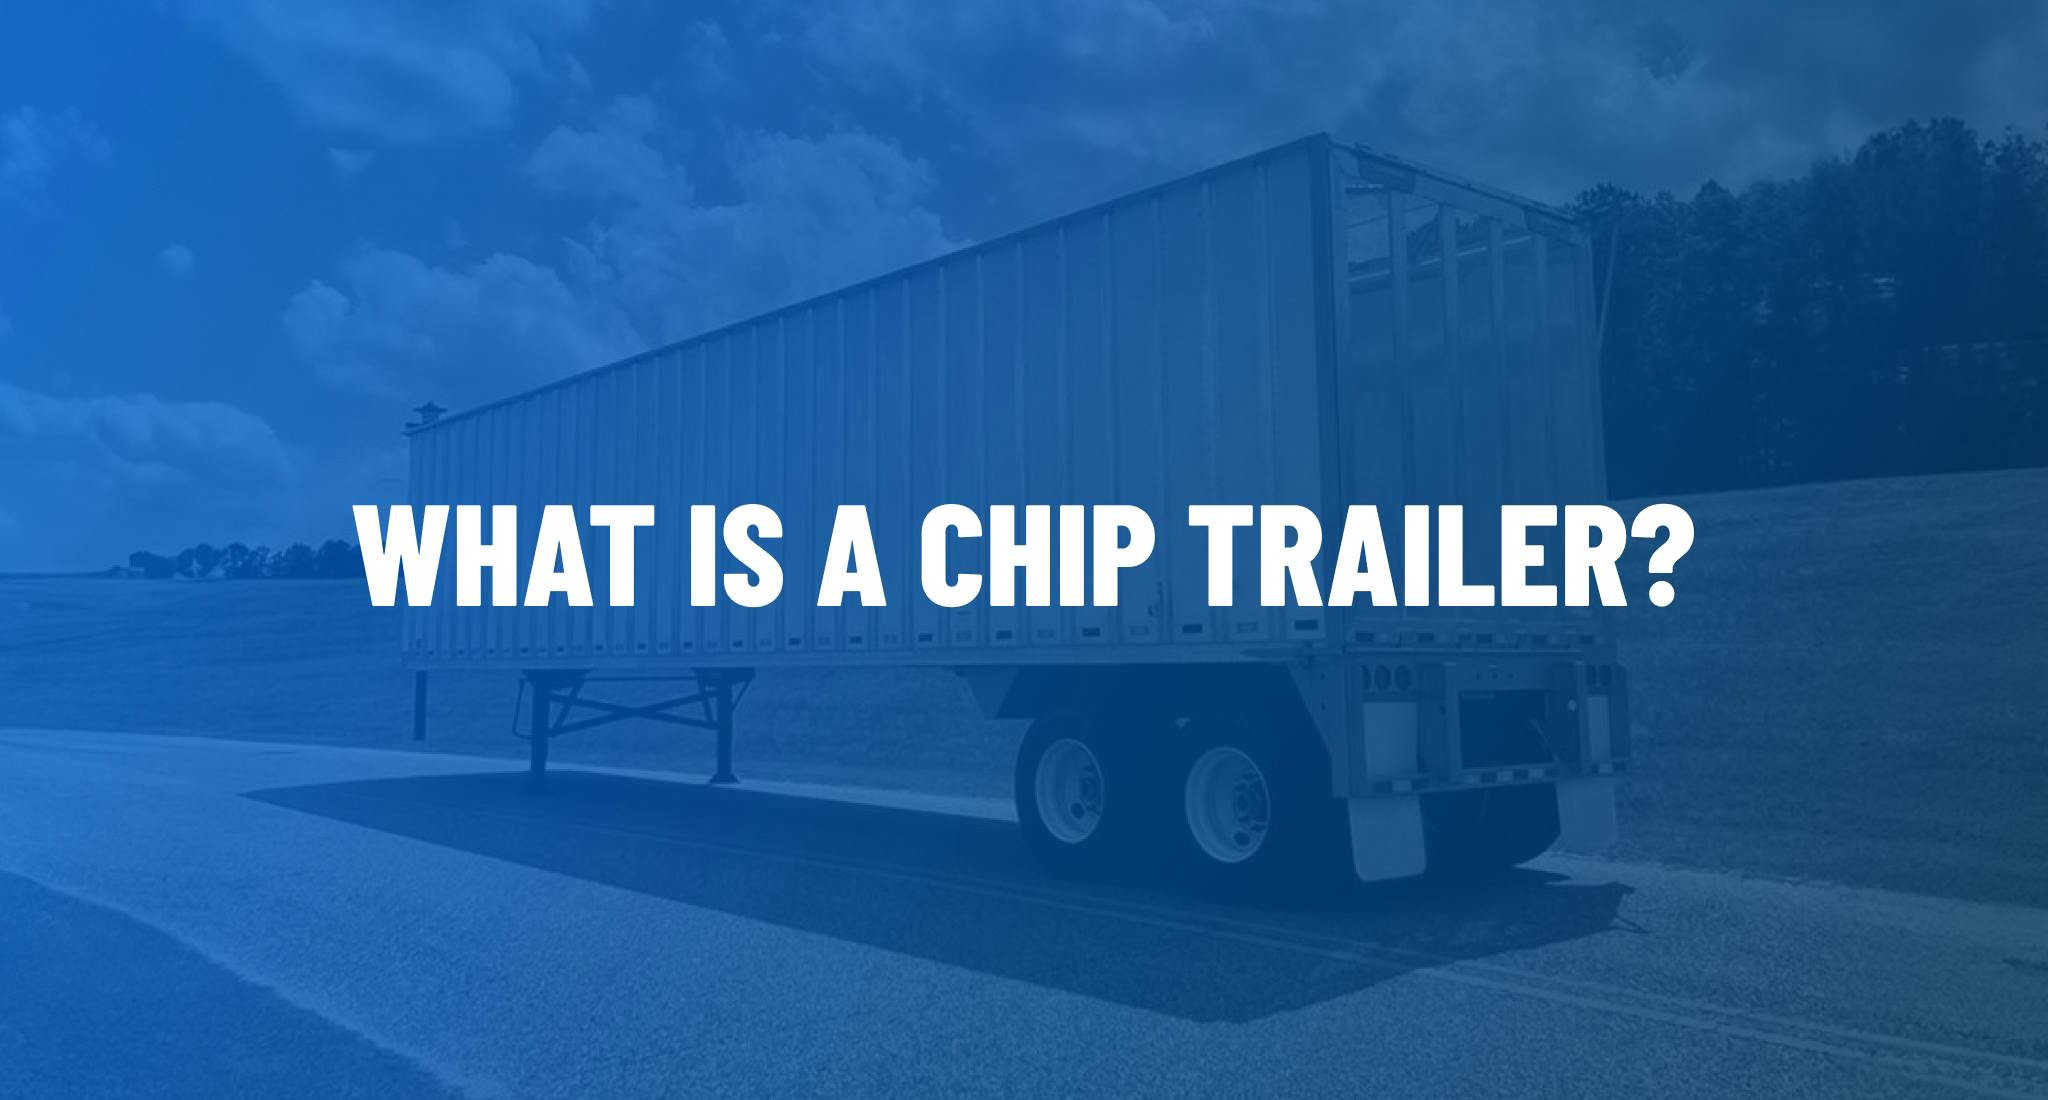 What is a chip trailer?